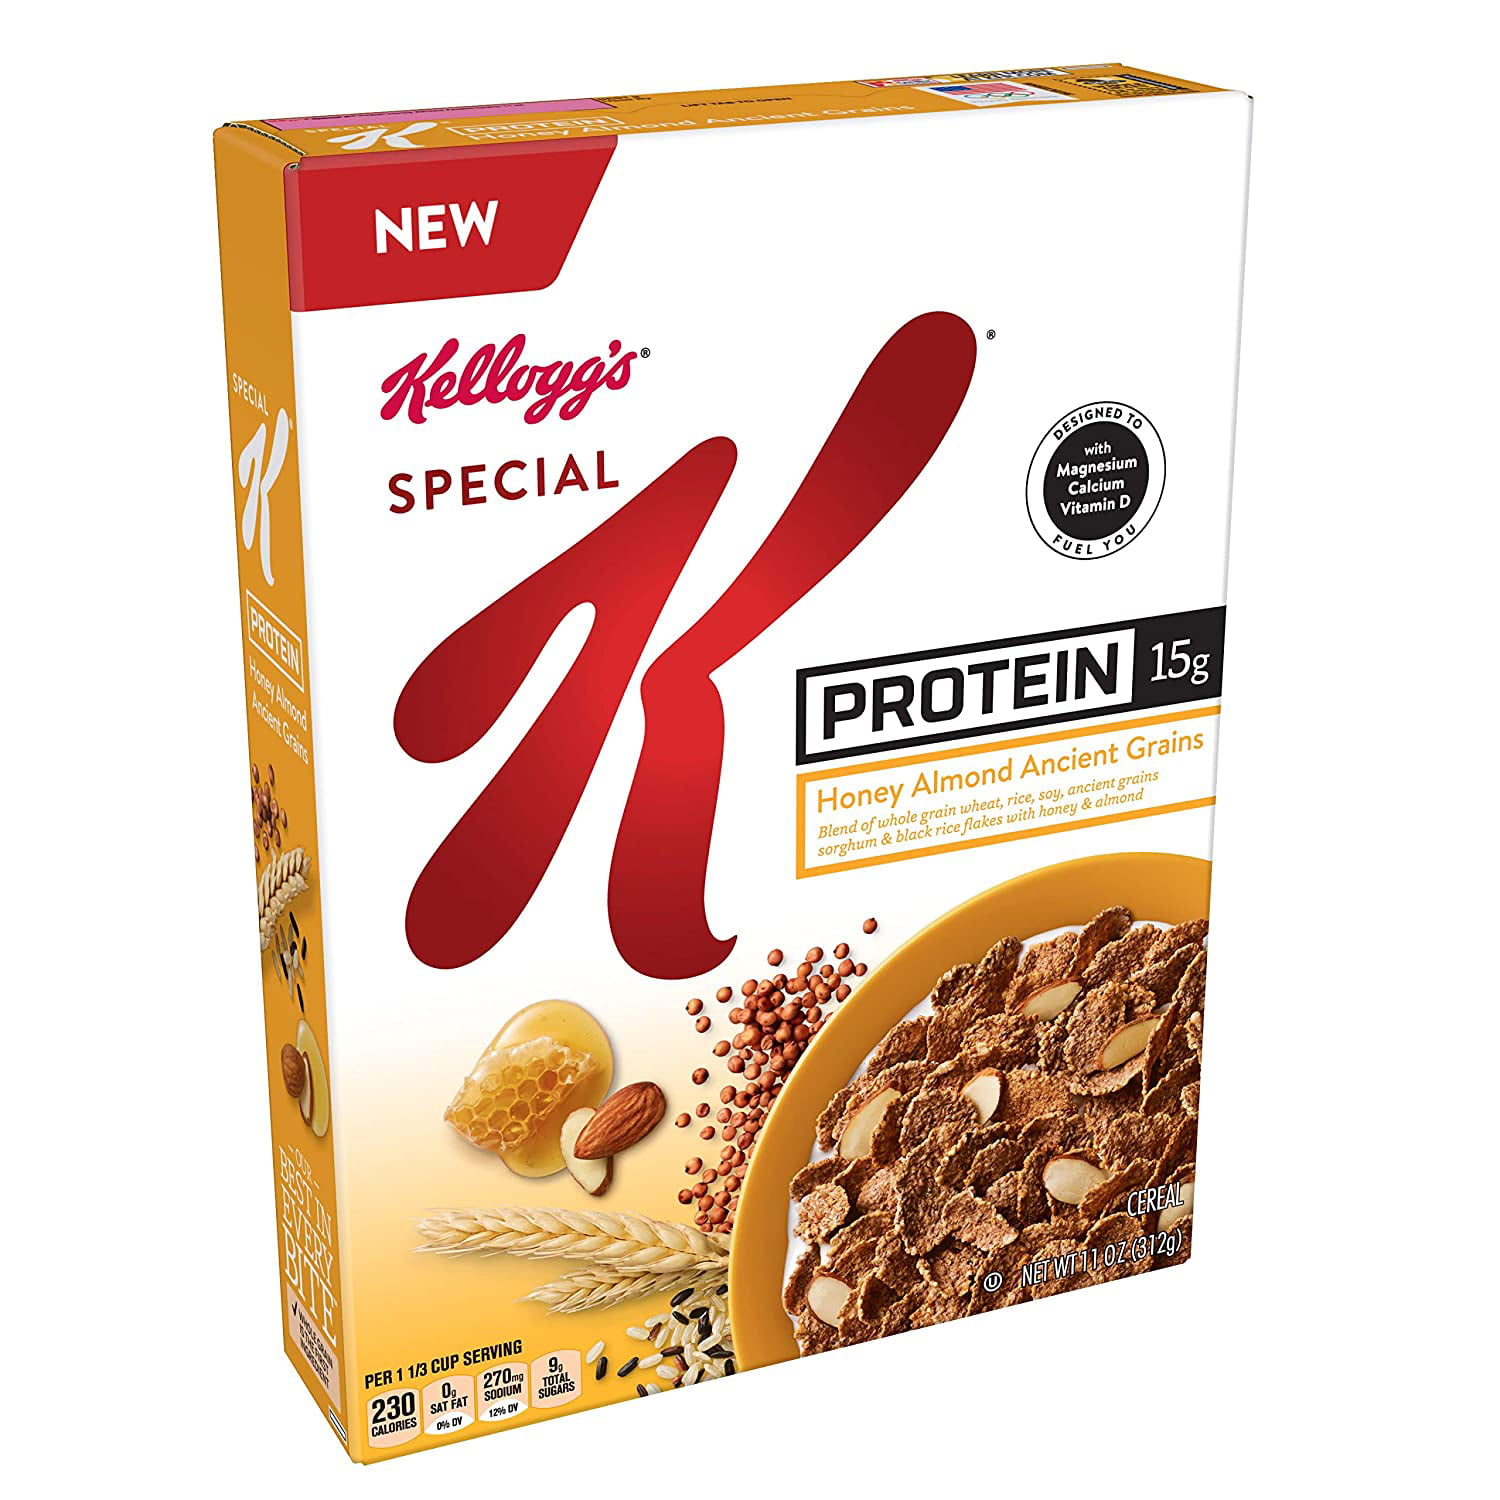 Kelloggs Special K Probiotics, Breakfast Cereal, Protein Honey Almond Ancient Grains (10 Count of 11 oz Boxes) 110 oz